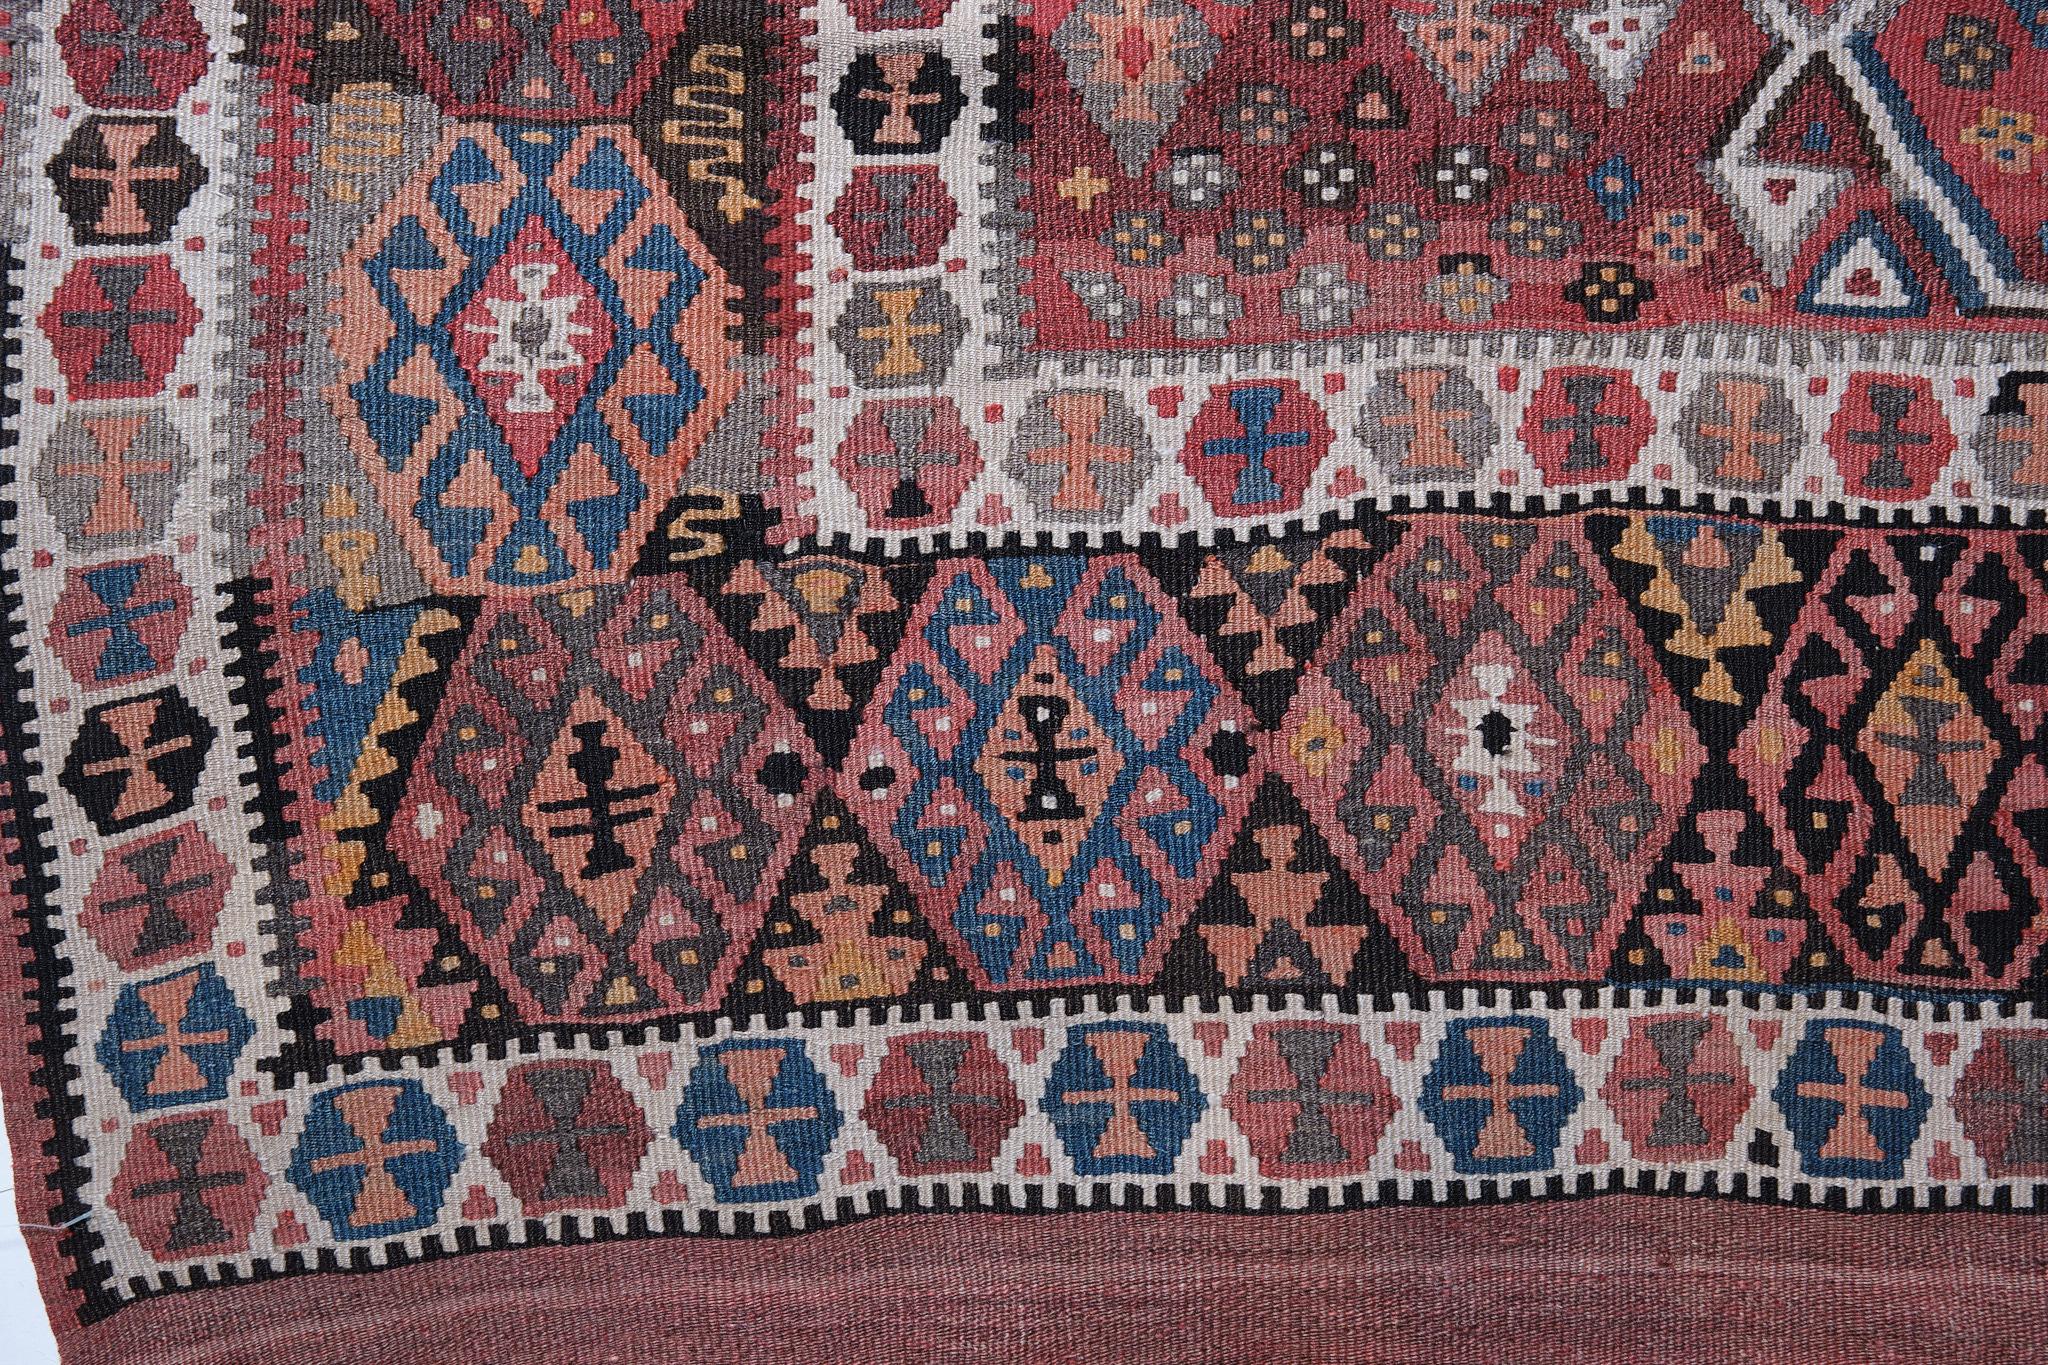 This is an Eastern Anatolian Antique Kilim from the Erzurum region with a rare and beautiful color composition.

Erzurum was once a key frontier town, used to defend Anatolia against many invasions, and was also an important point on the caravan